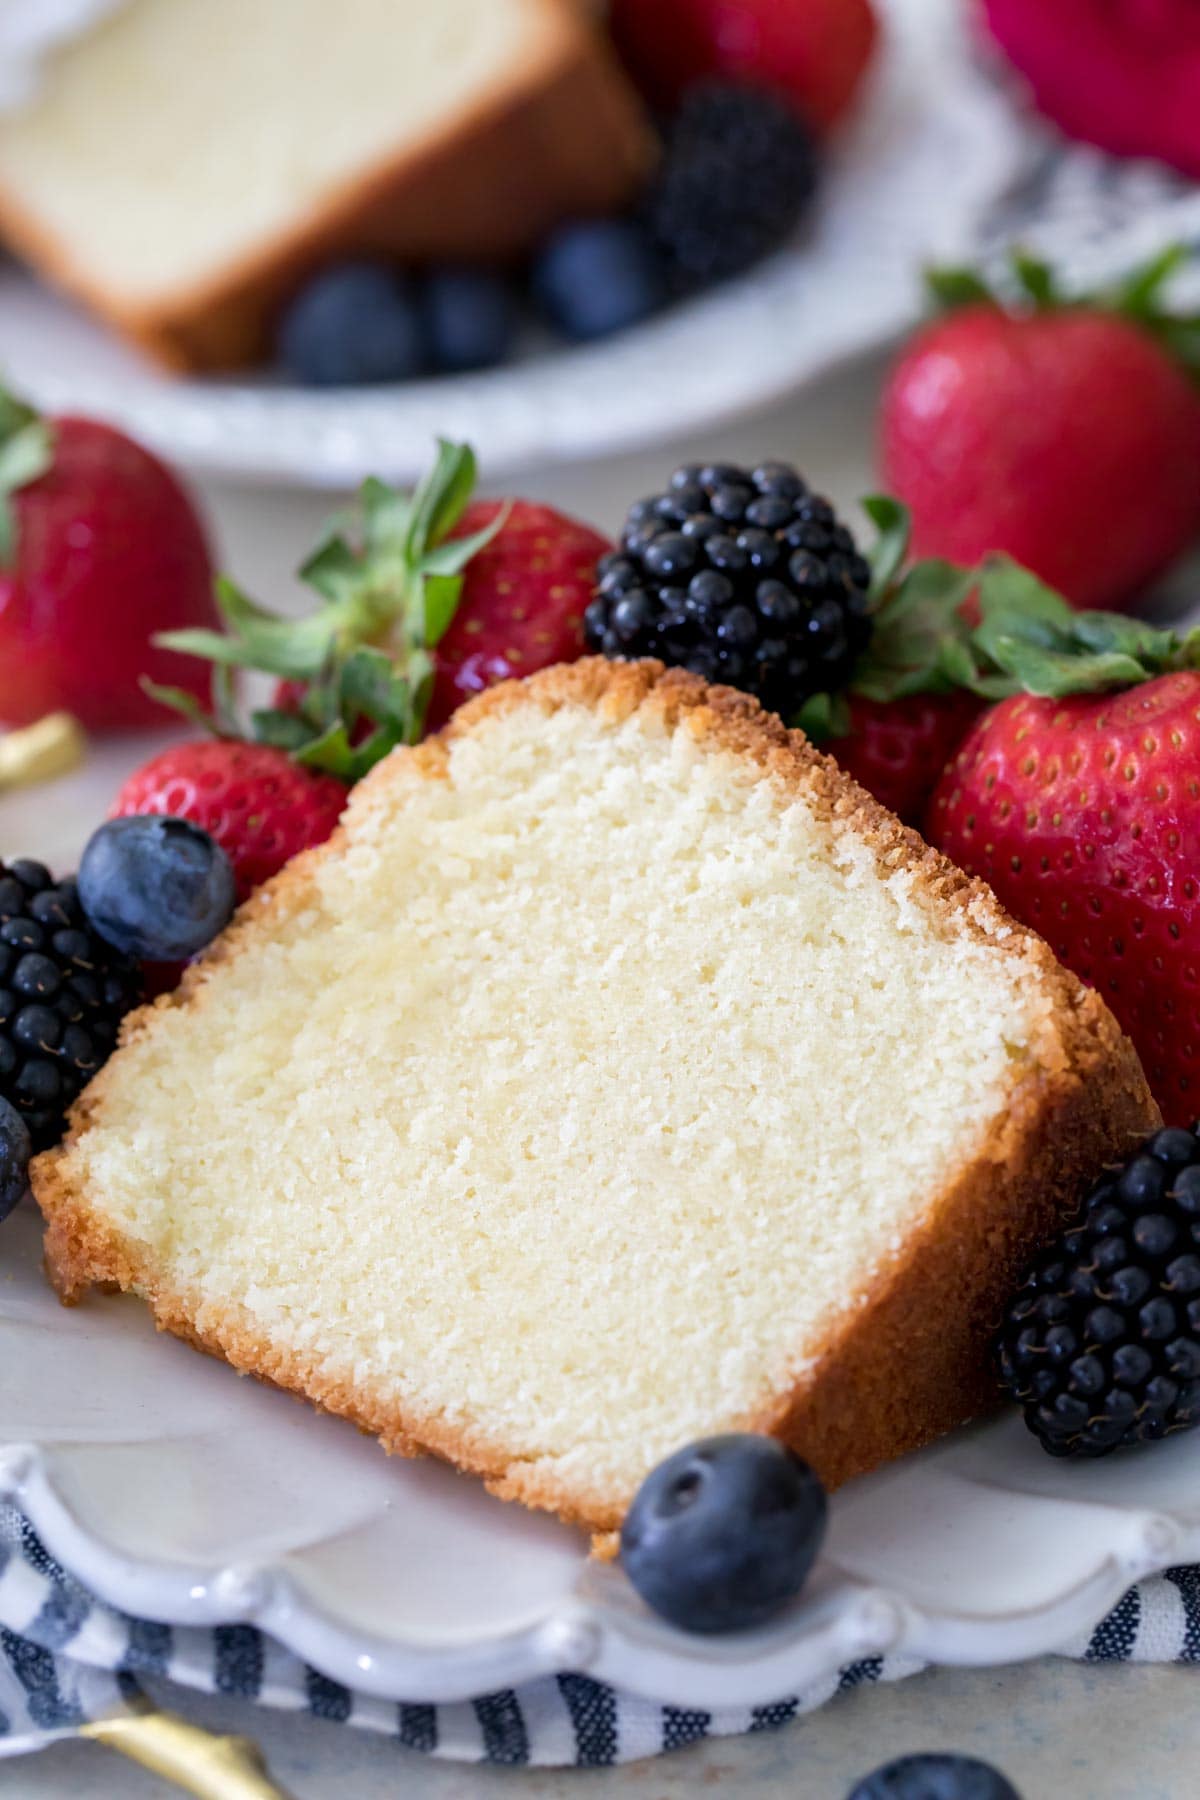 Thick slice of pound cake surrounded by fresh berries on white plate